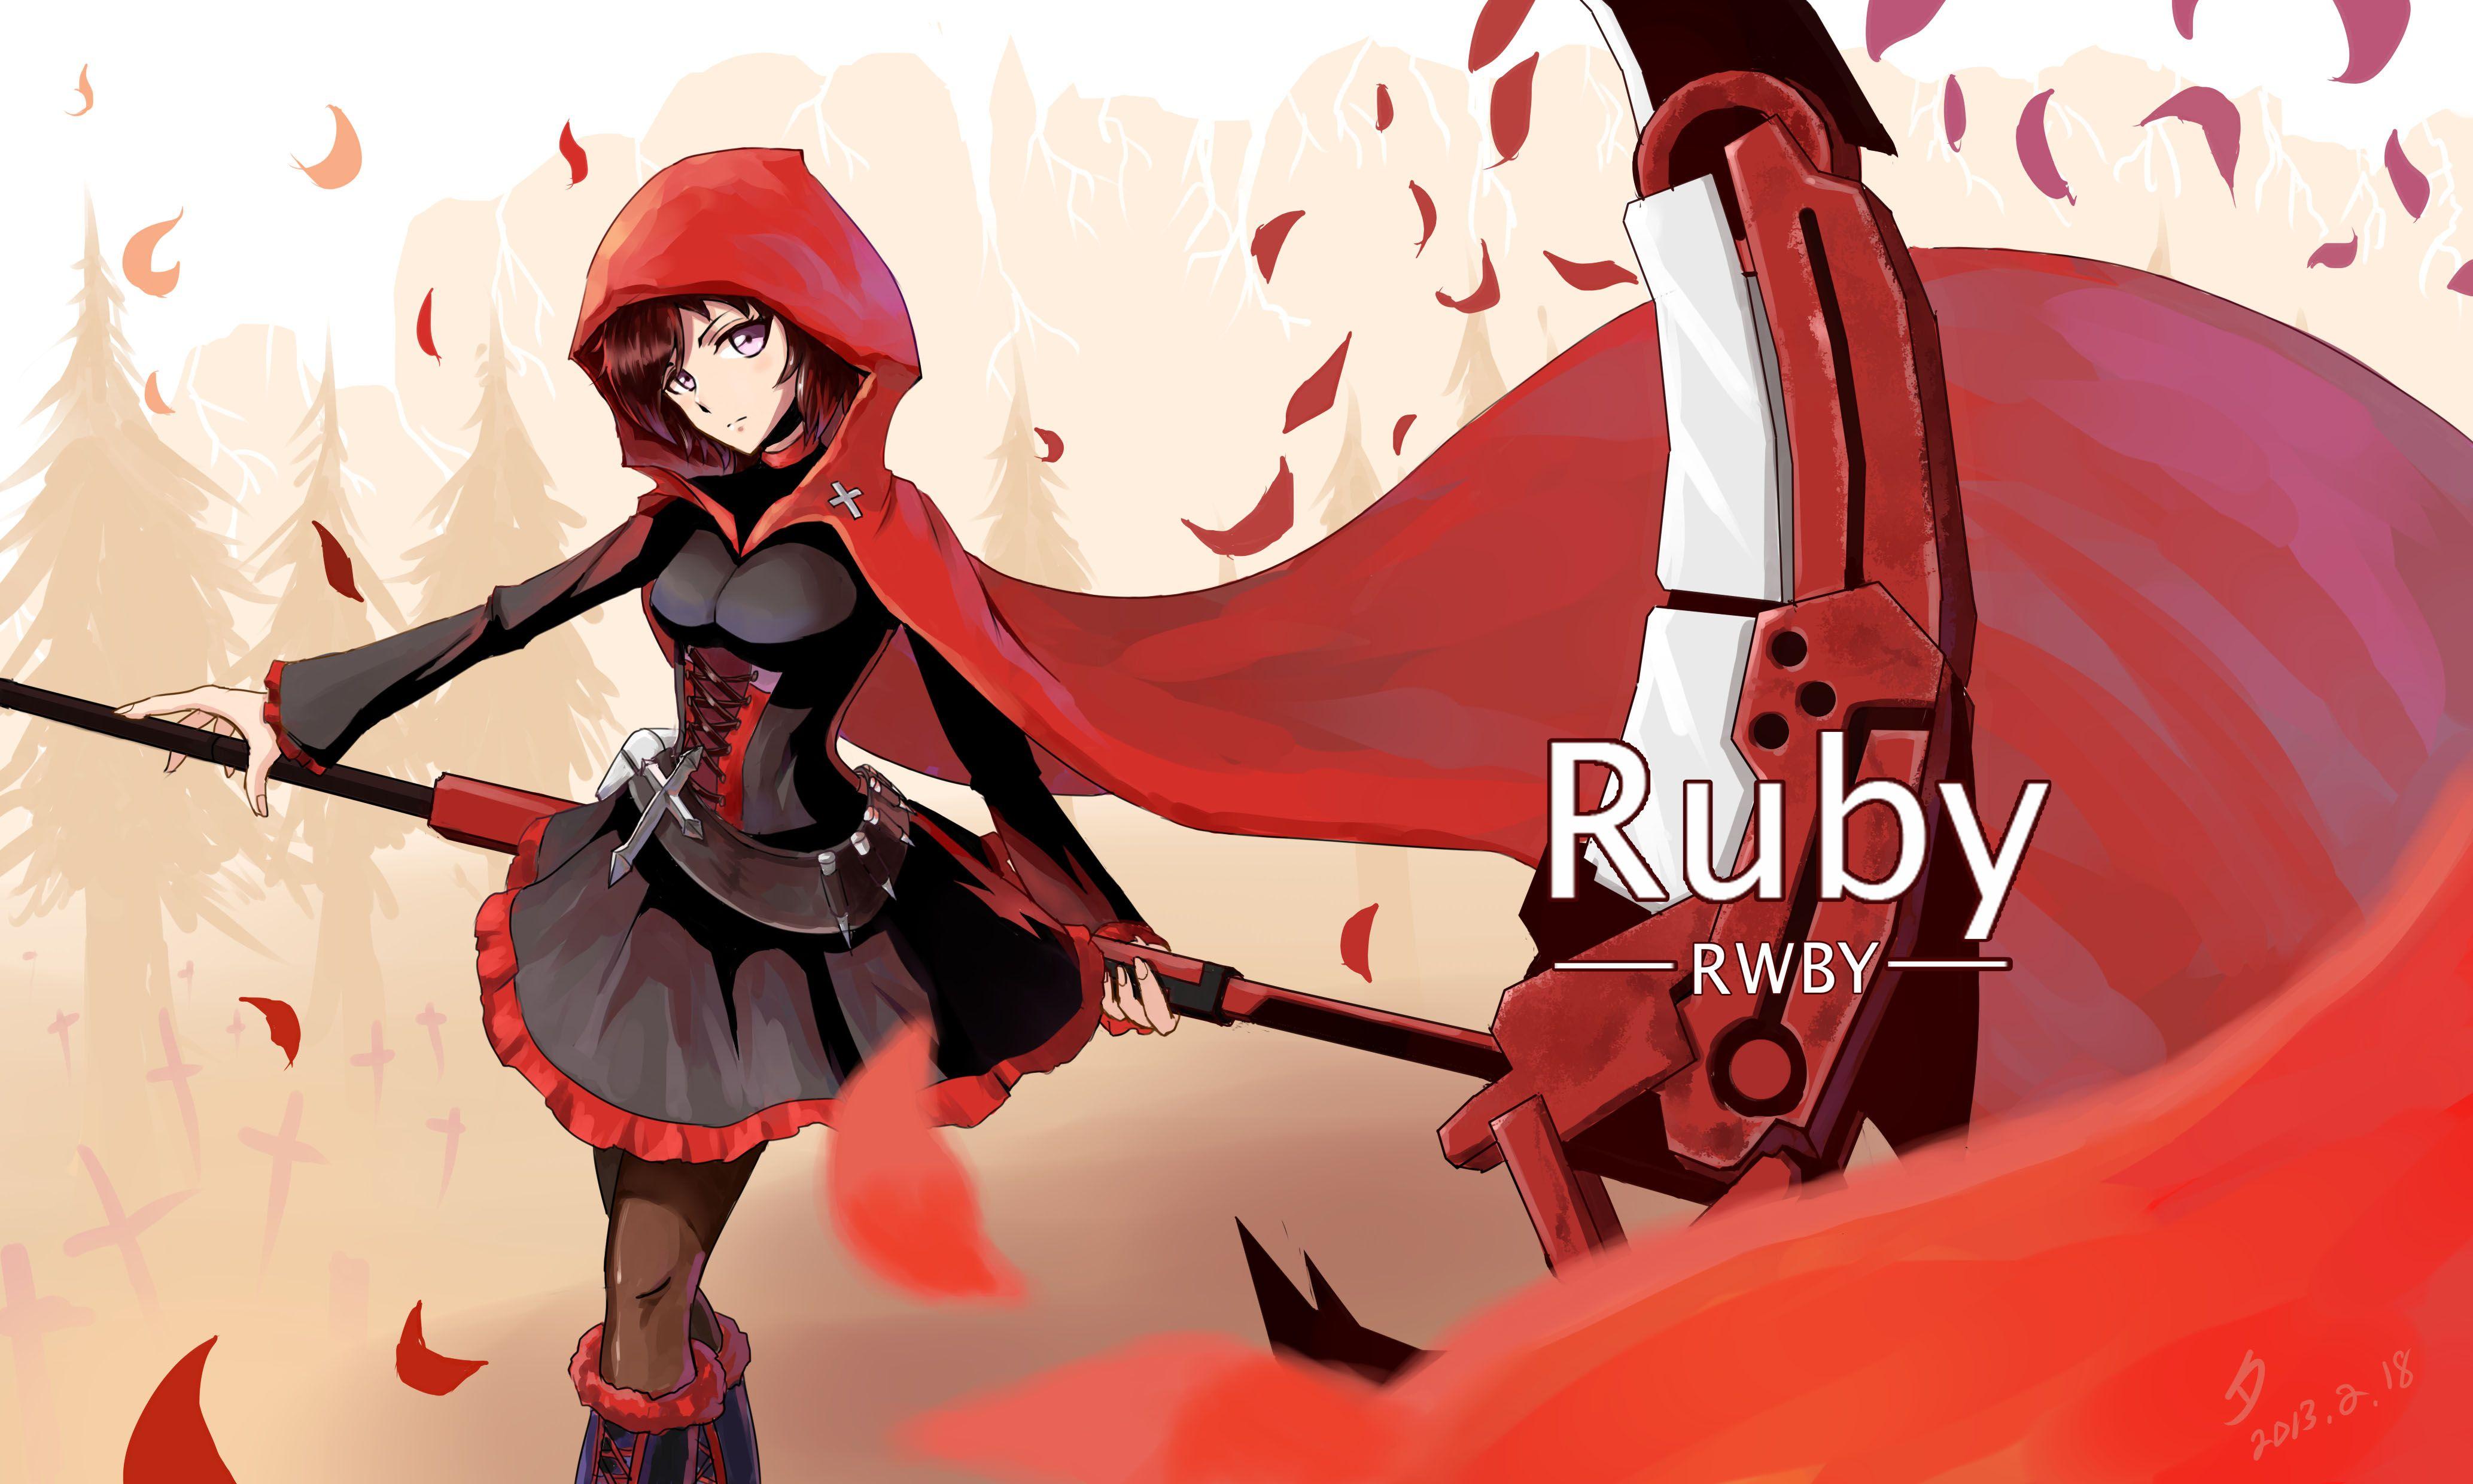 RWBY: Ruby image Red Wallpaper HD wallpaper and background photo